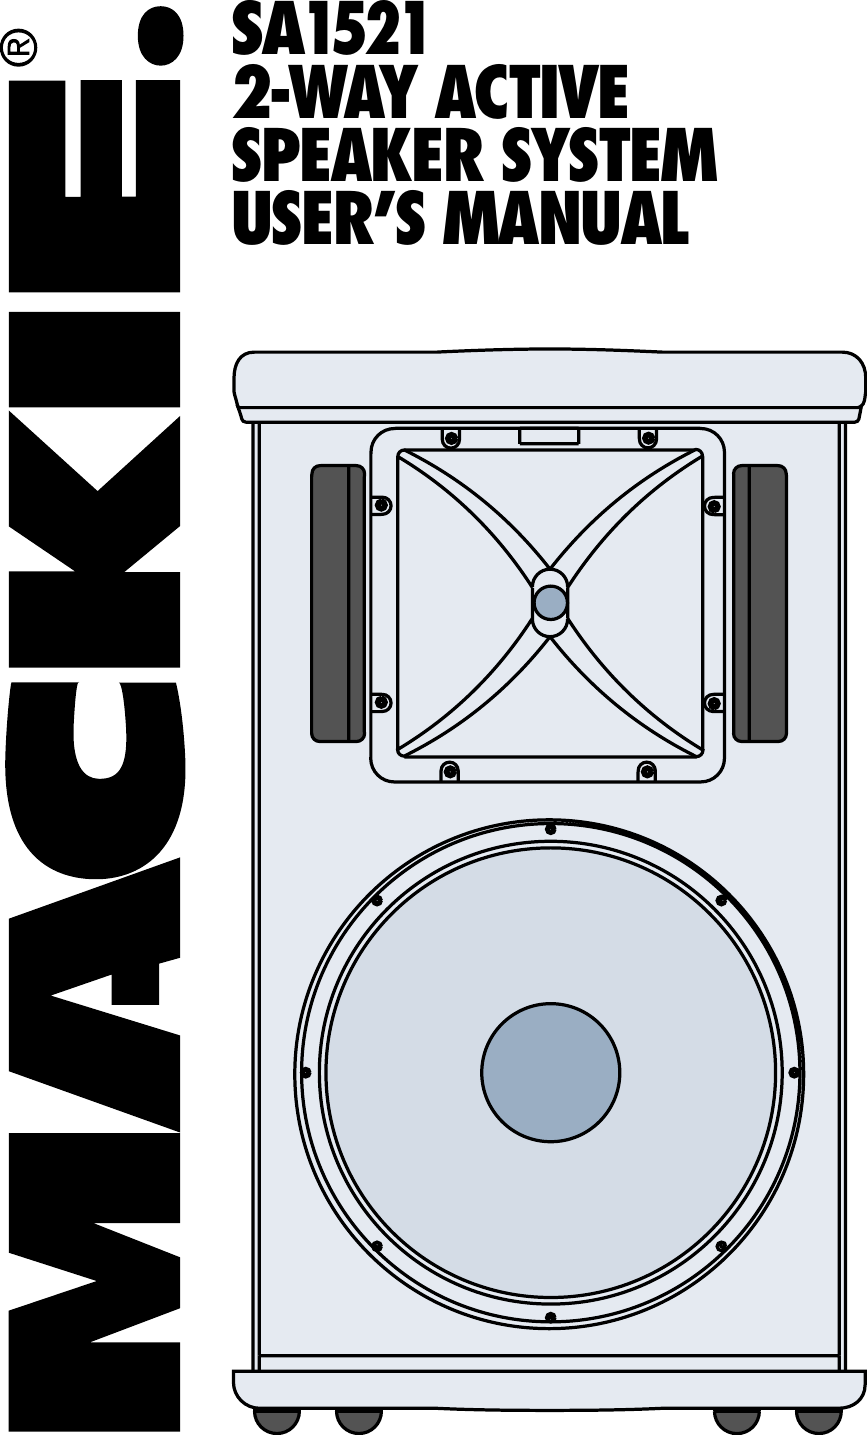 Mackie Sa1521 Users Manual 2 Way Active Speaker System User's